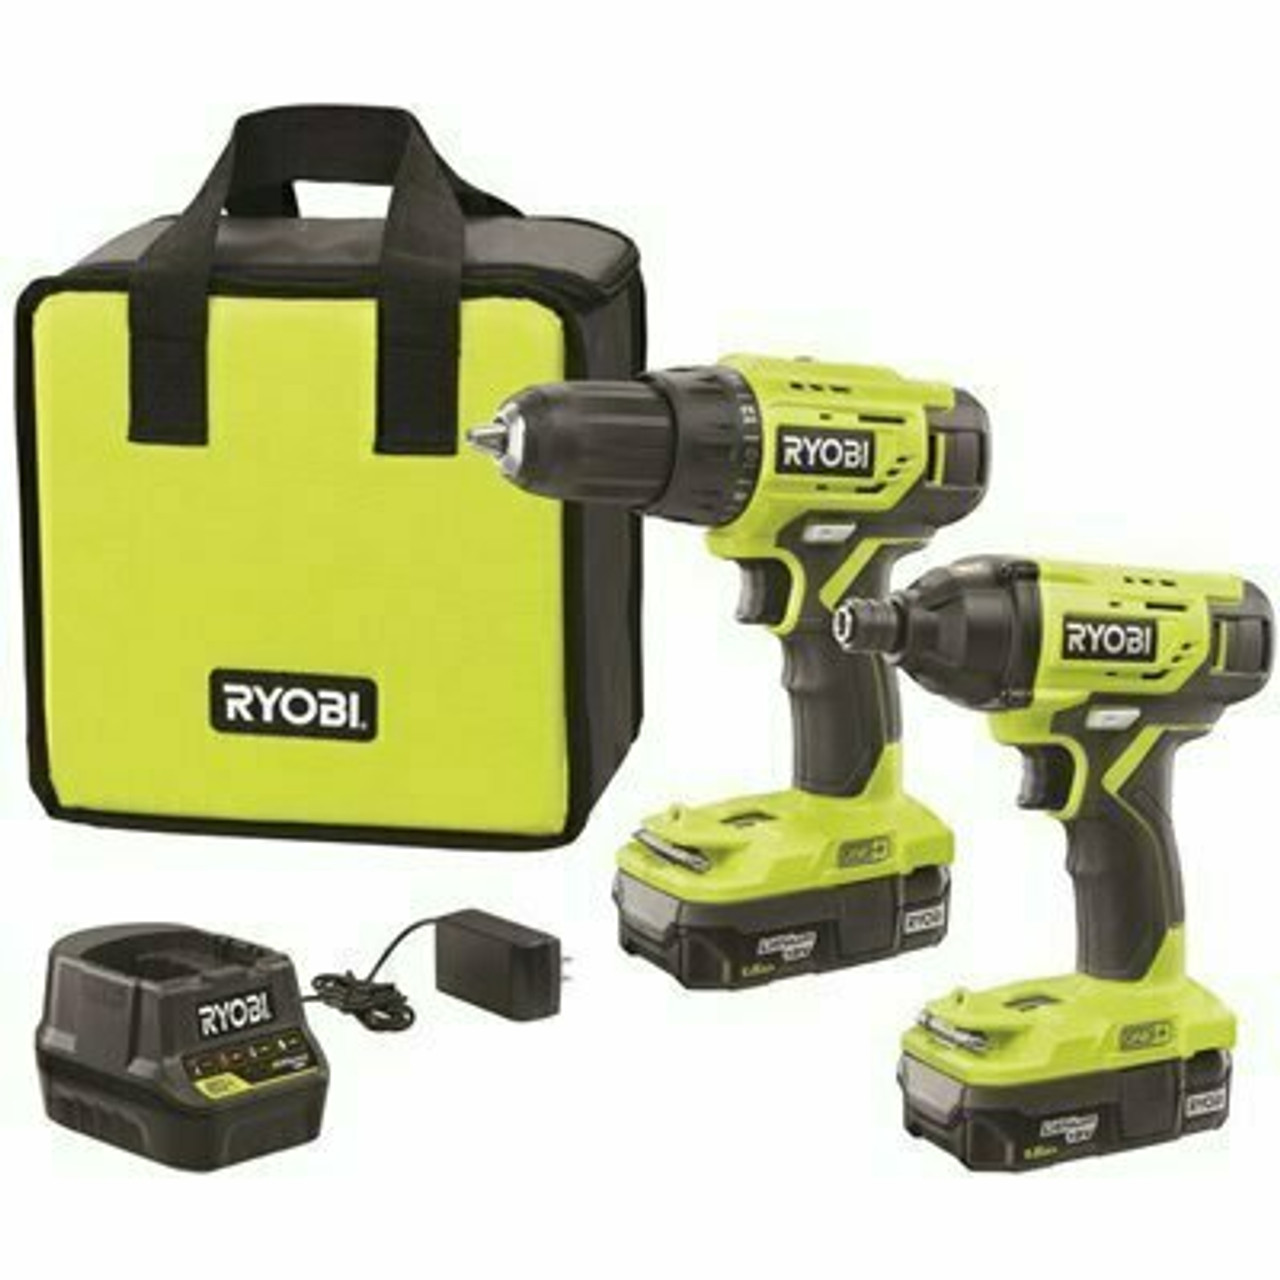 Ryobi One+ 18V Lithium-Ion Cordless 2-Tool Combo Kit W/ Drill/Driver, Impact Driver, (2) 1.5 Ah Batteries, Charger And Bag